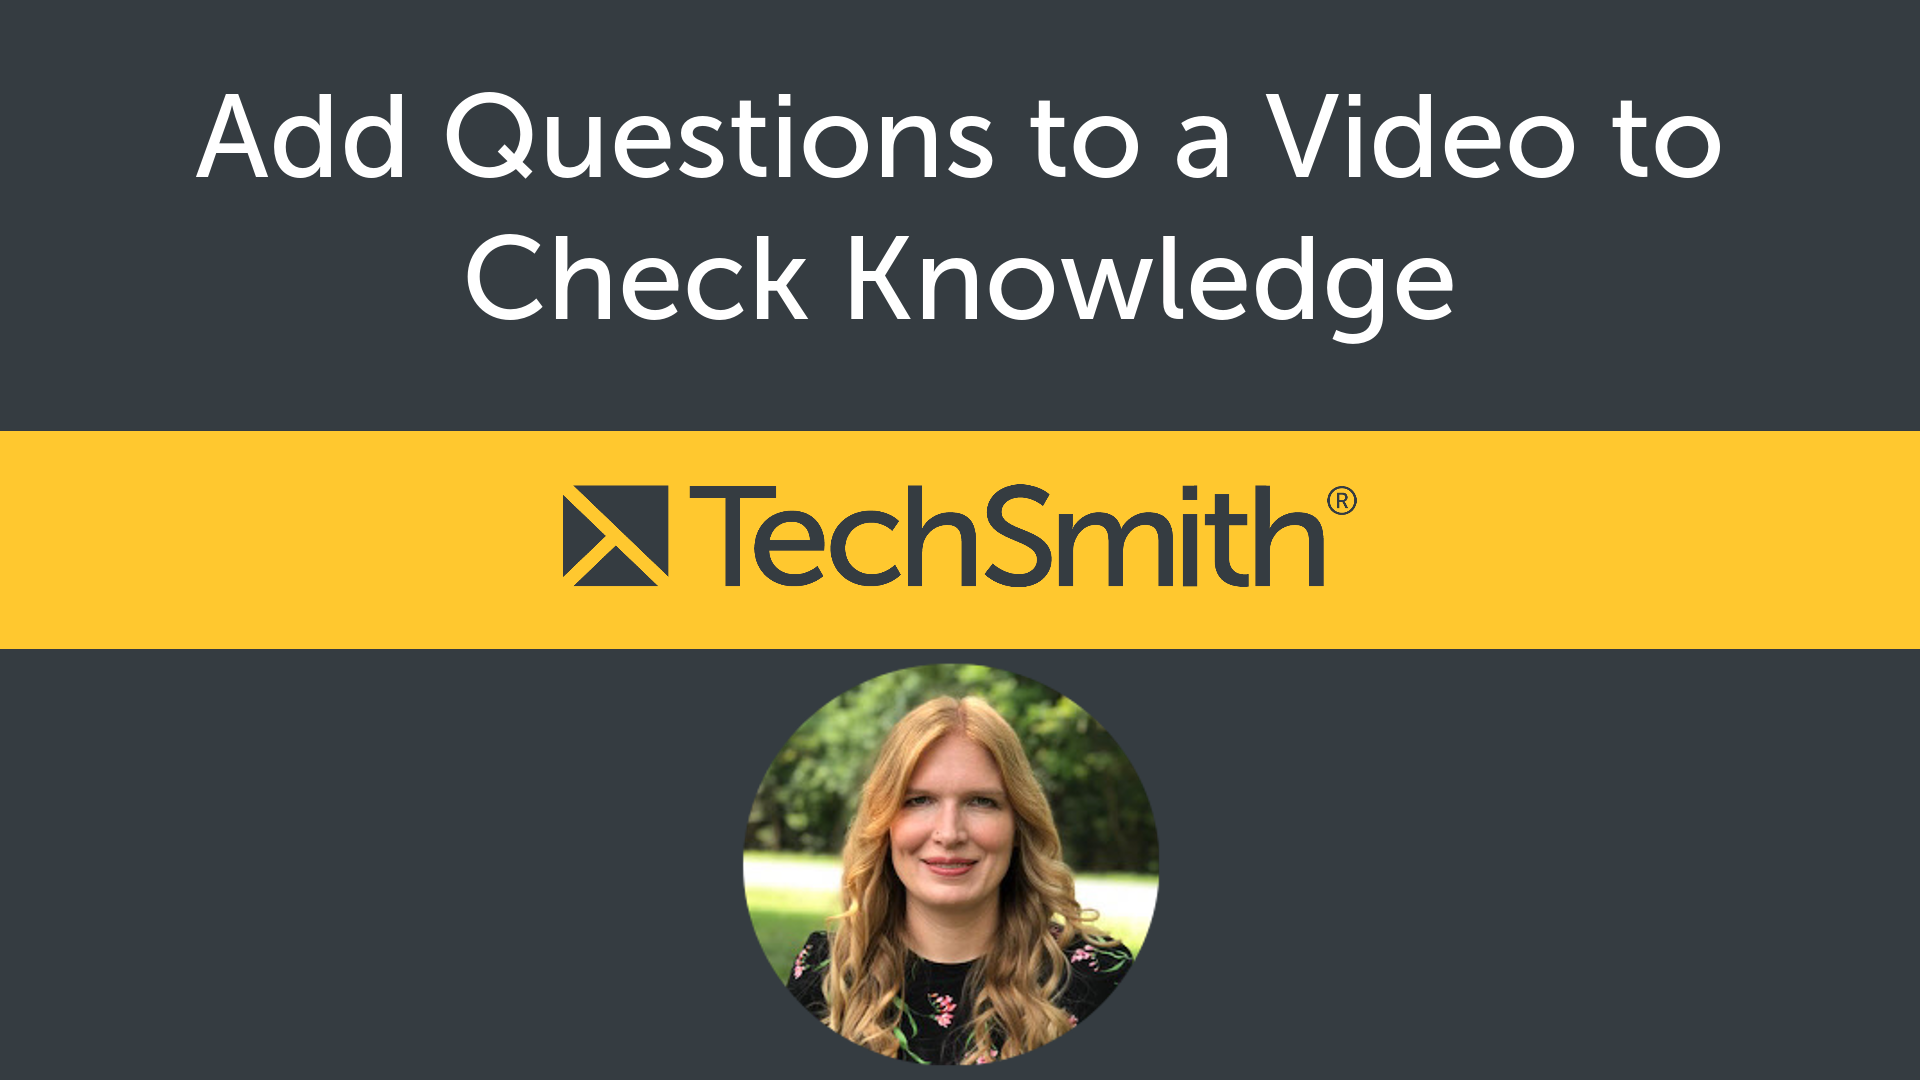 How to Add Questions to a Video to Check Knowledge